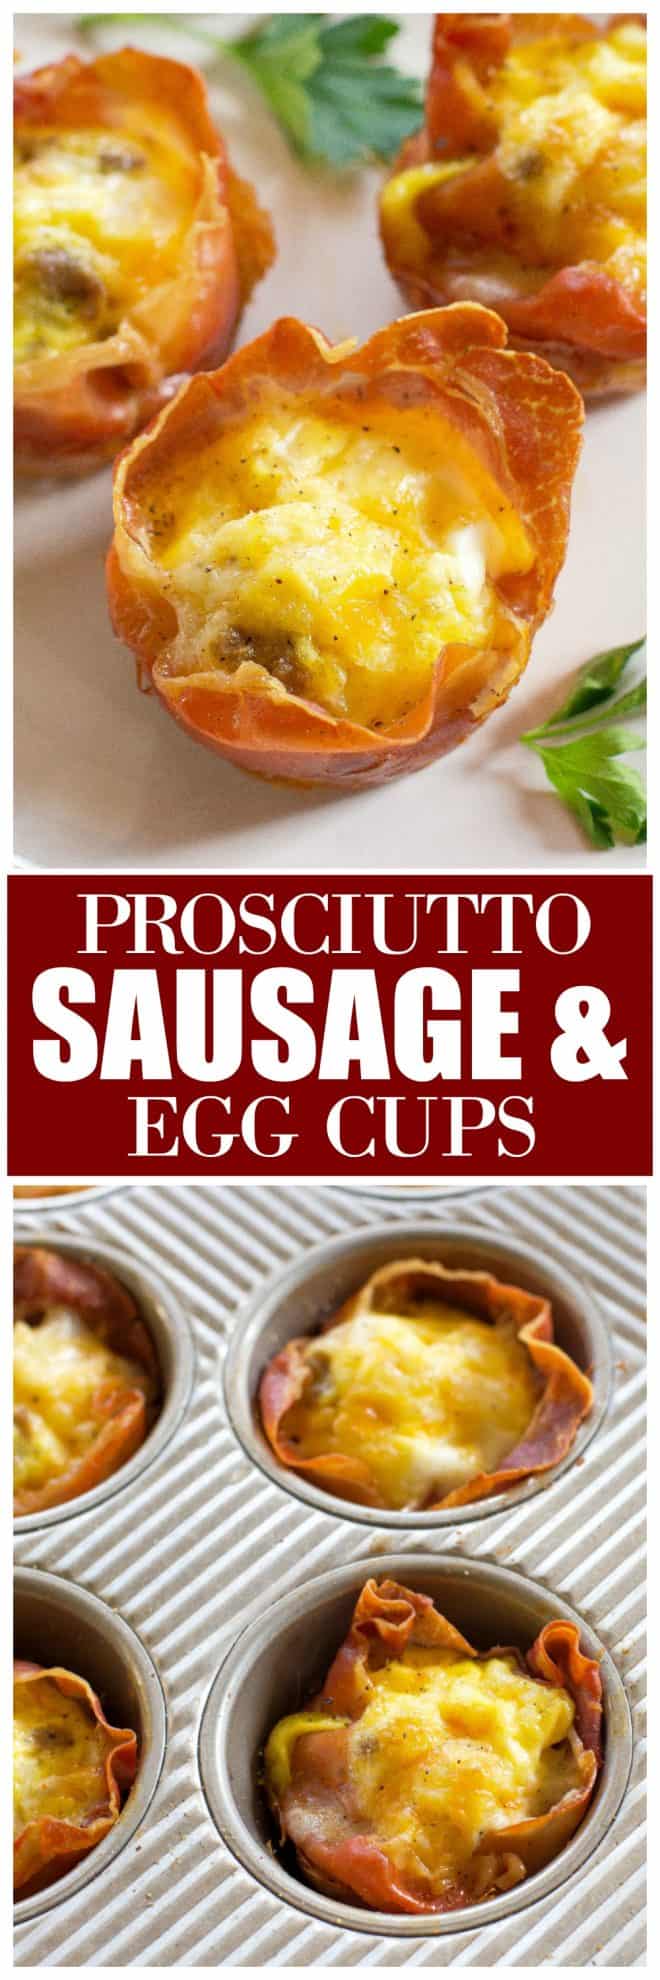 Prosciutto Sausage and Egg Cups